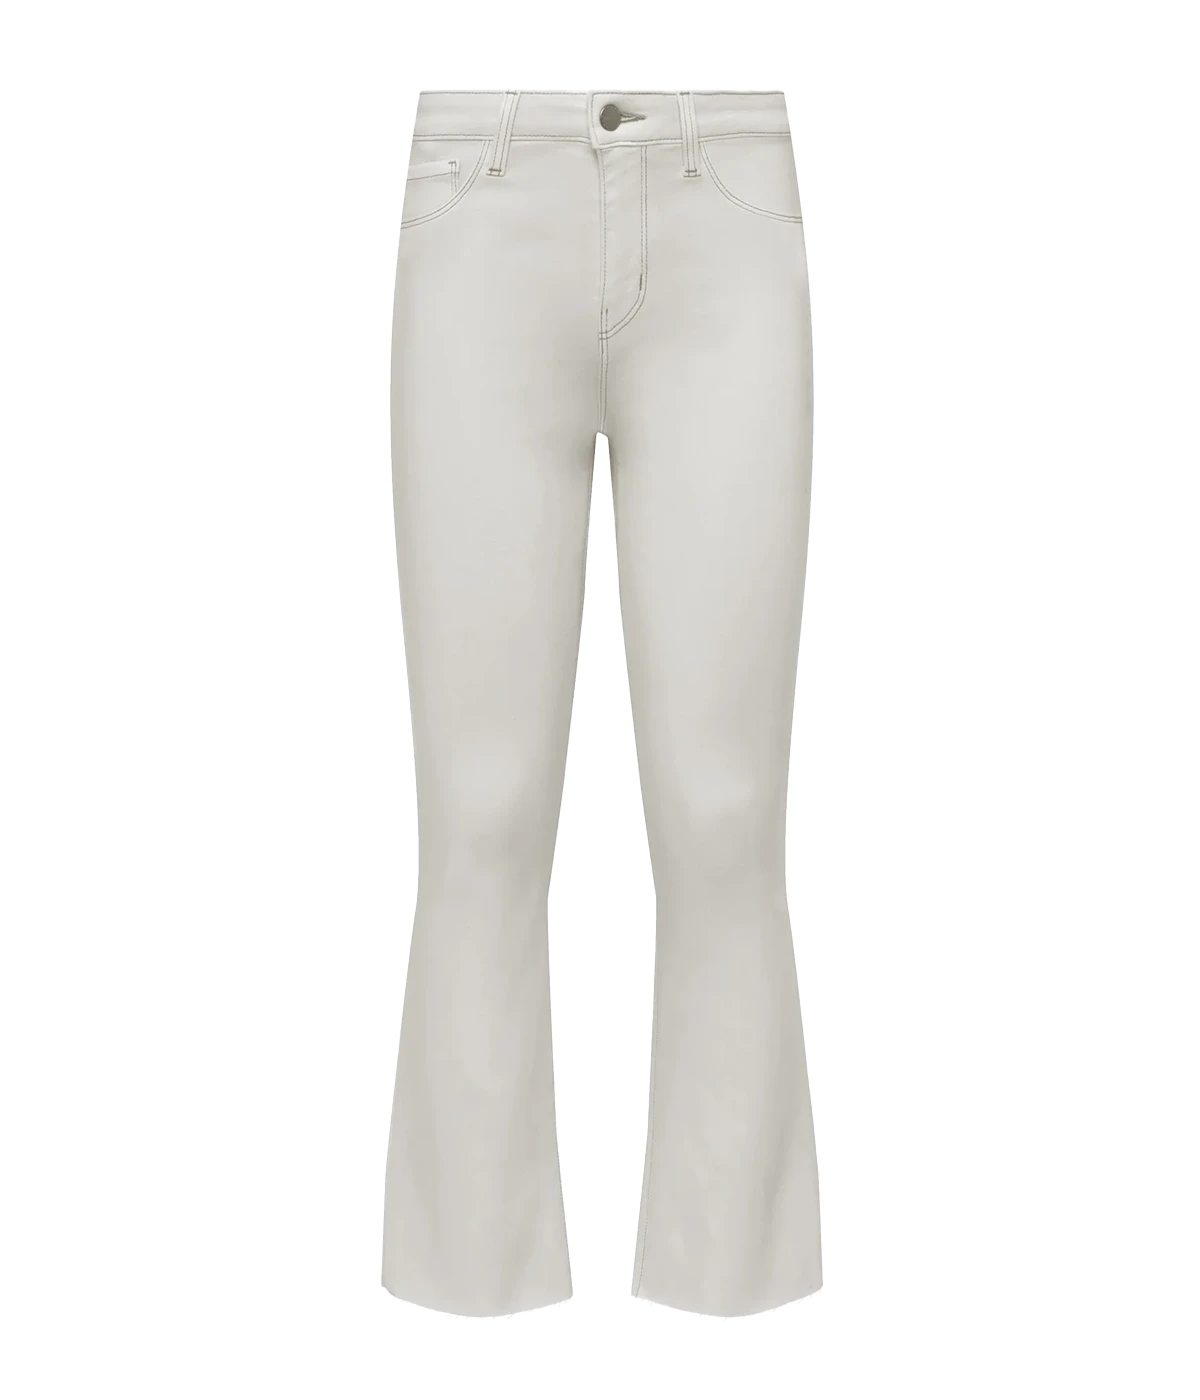 A high rise classic cropped flare jean, in a white colourway. With Silver hardware, contrast stitching, flared leg and raw hem. Throw on and go, elevated jean, comfortable, made in USA.